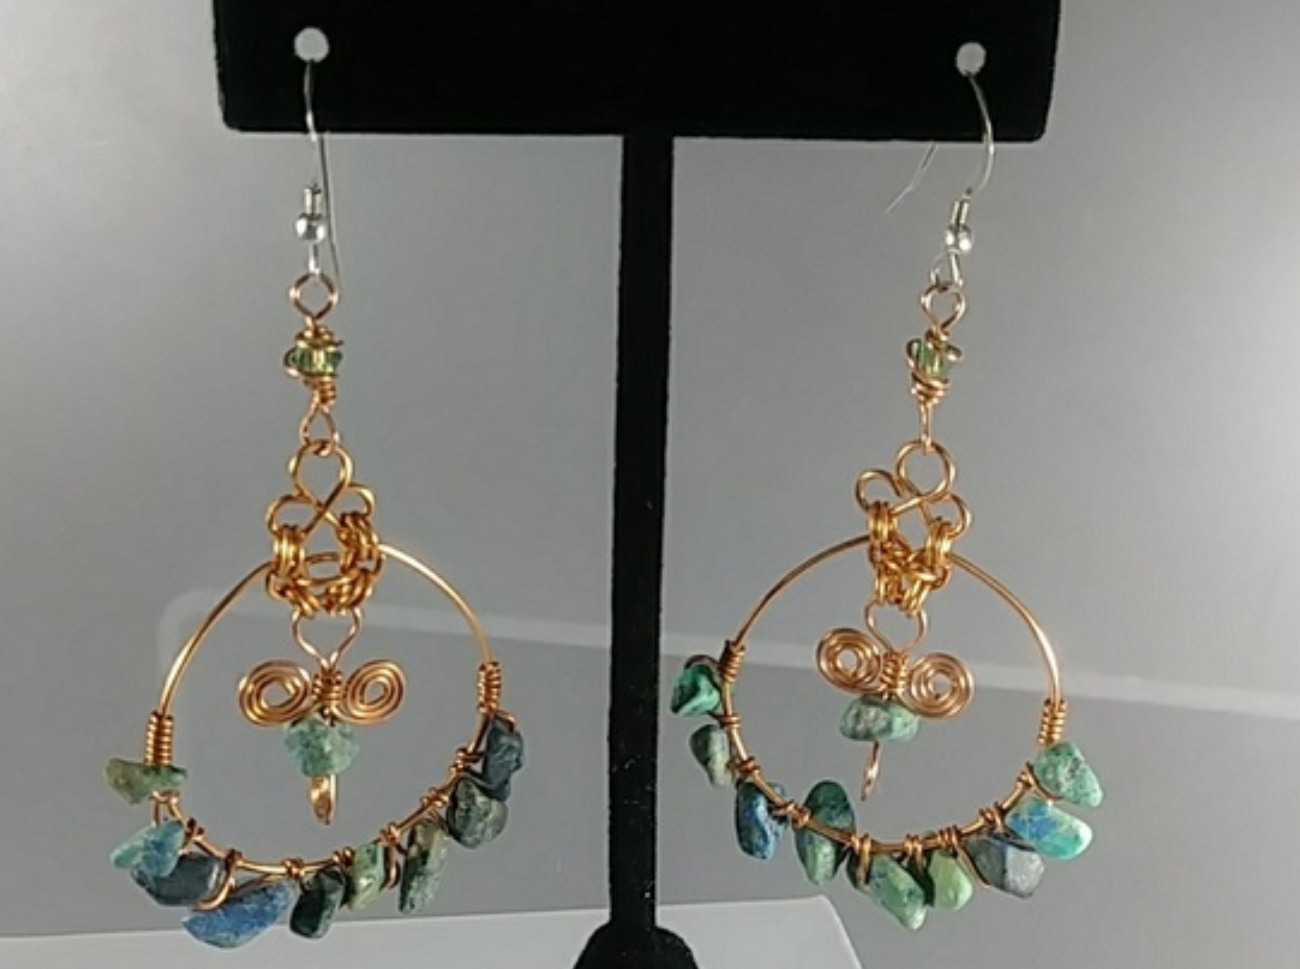 (621 - EAR) - Description: Earrings: Copper Wire, Turquoise Gemstone Chips. Swarovski Crystal Beads (Sterling Silver Earwire)  Dimension: 3 1/4 ' L (Inches)